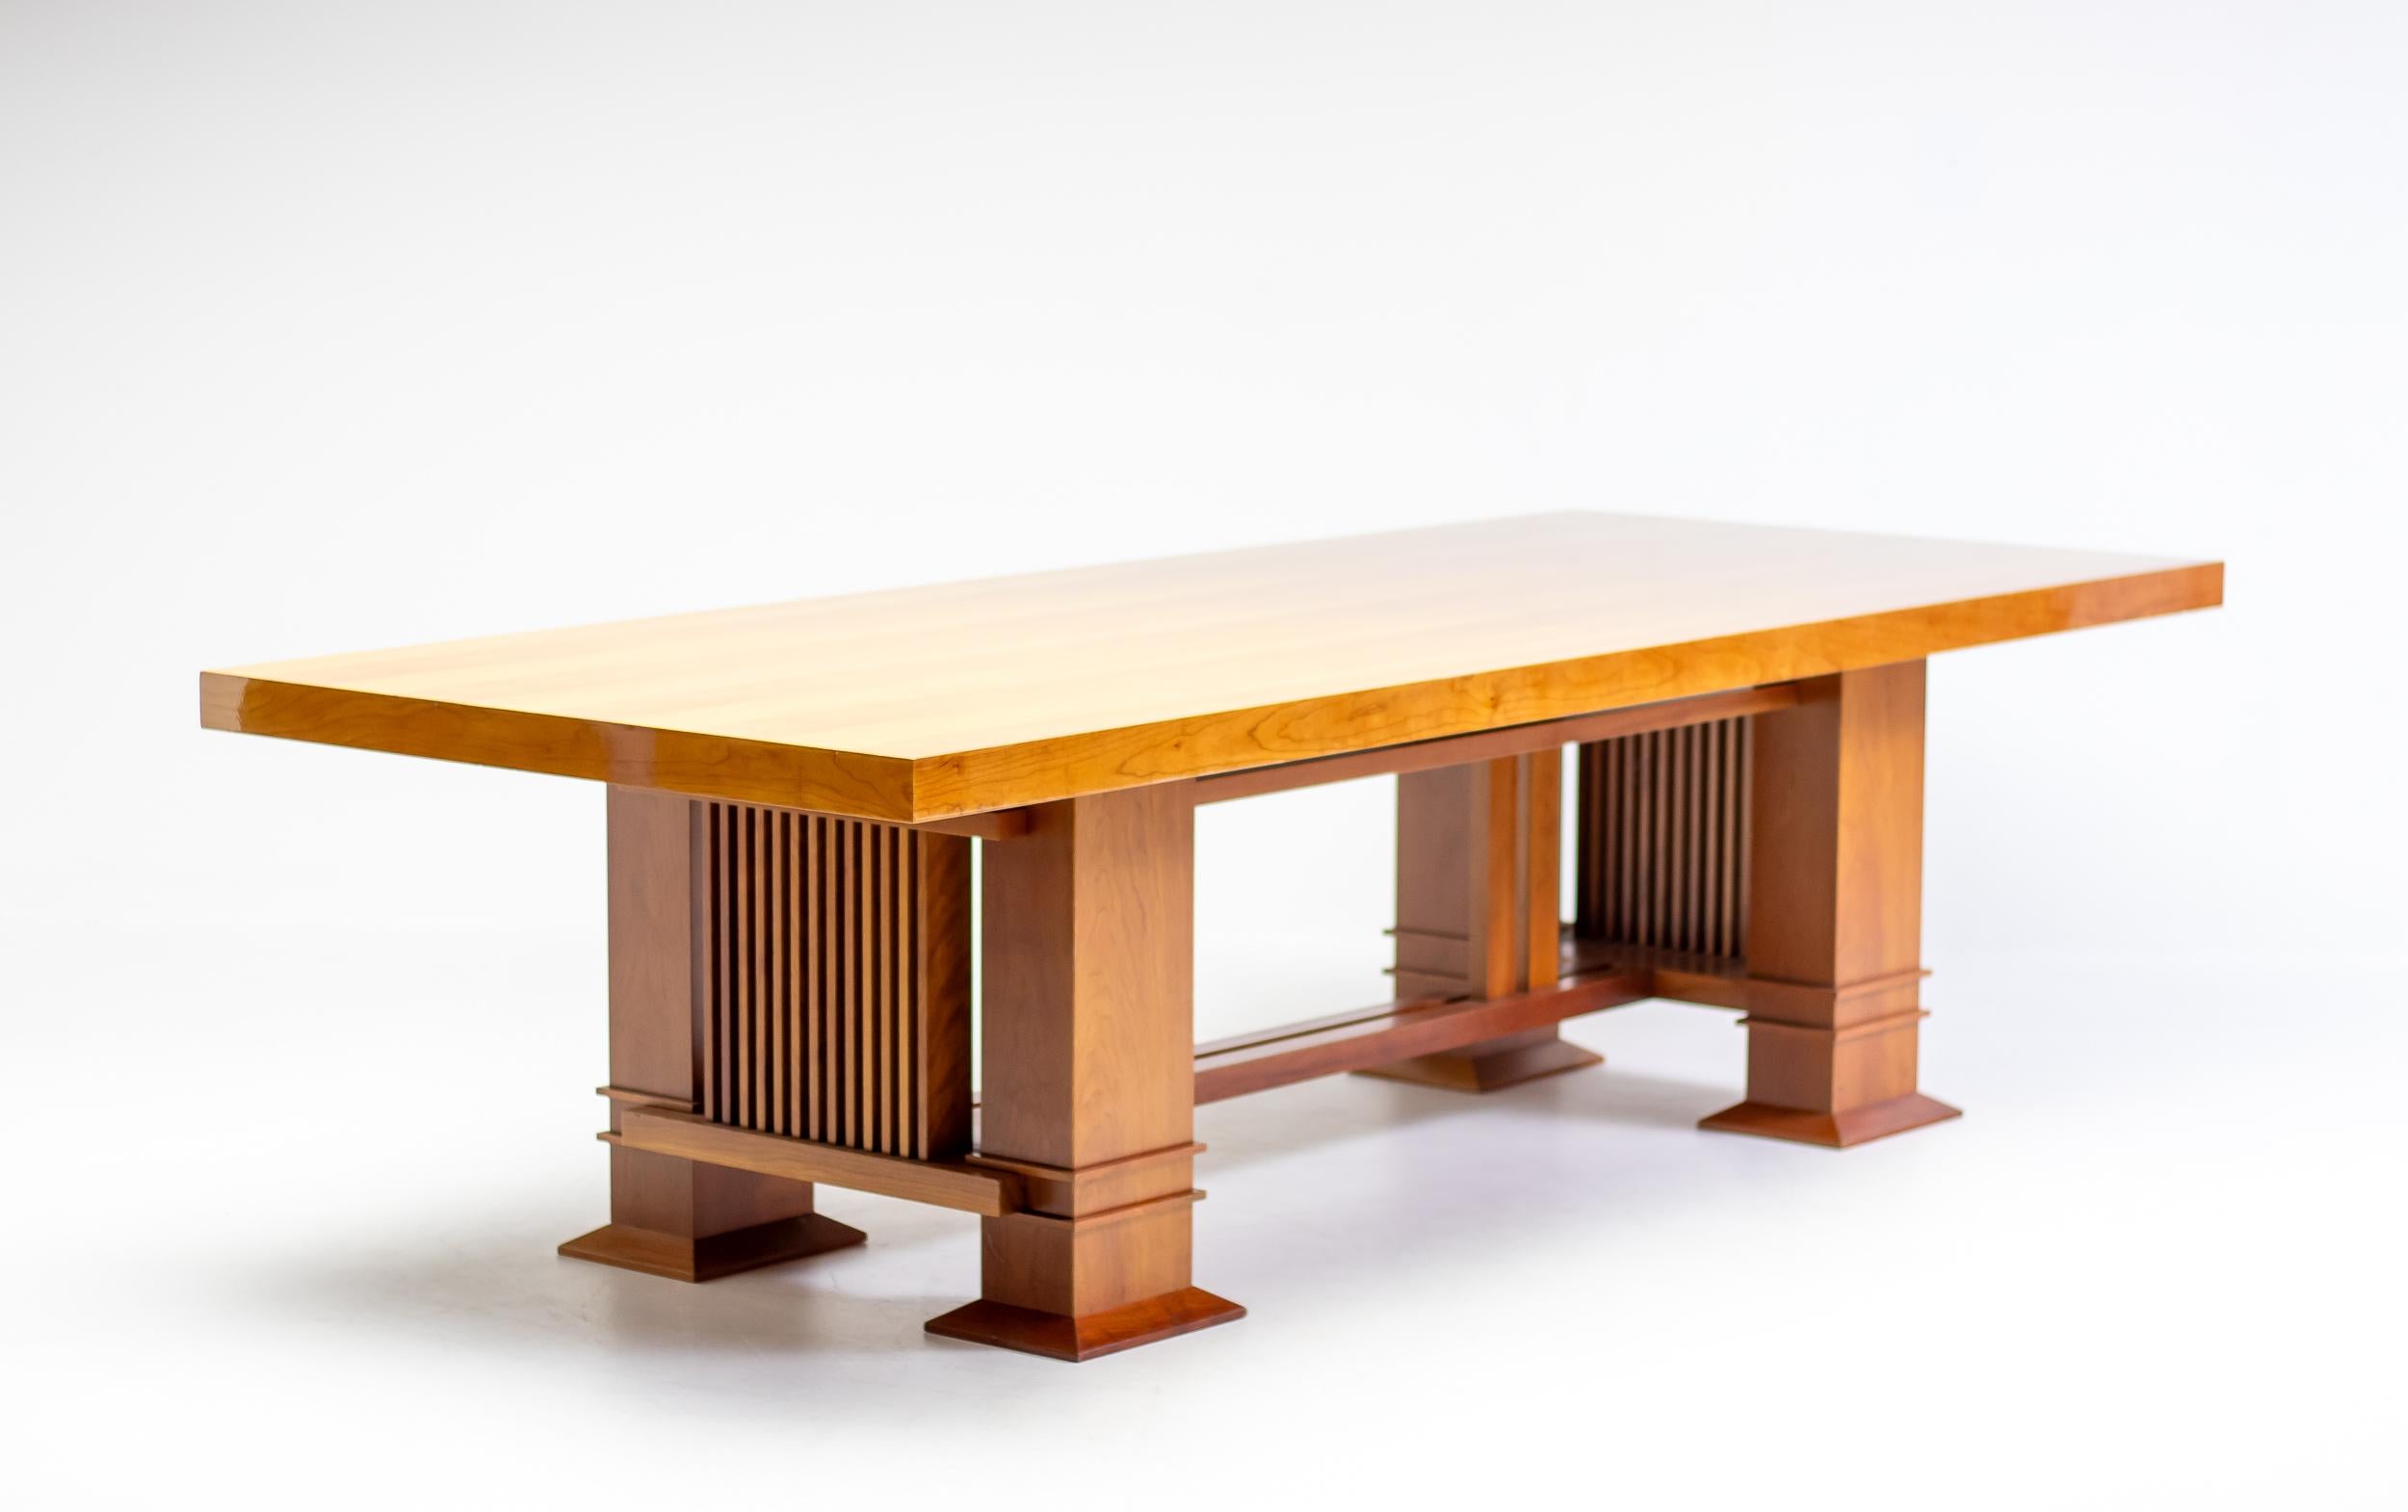 Rare early 605 Allen table in cherrywood, designed in 1917 by Frank Lloyd Wright and made by Cassina.
Marked with Cassina stamp, early serial no. and Frank Lloyd Wright signature, made in the first year of production, 1986.

During his 70-year